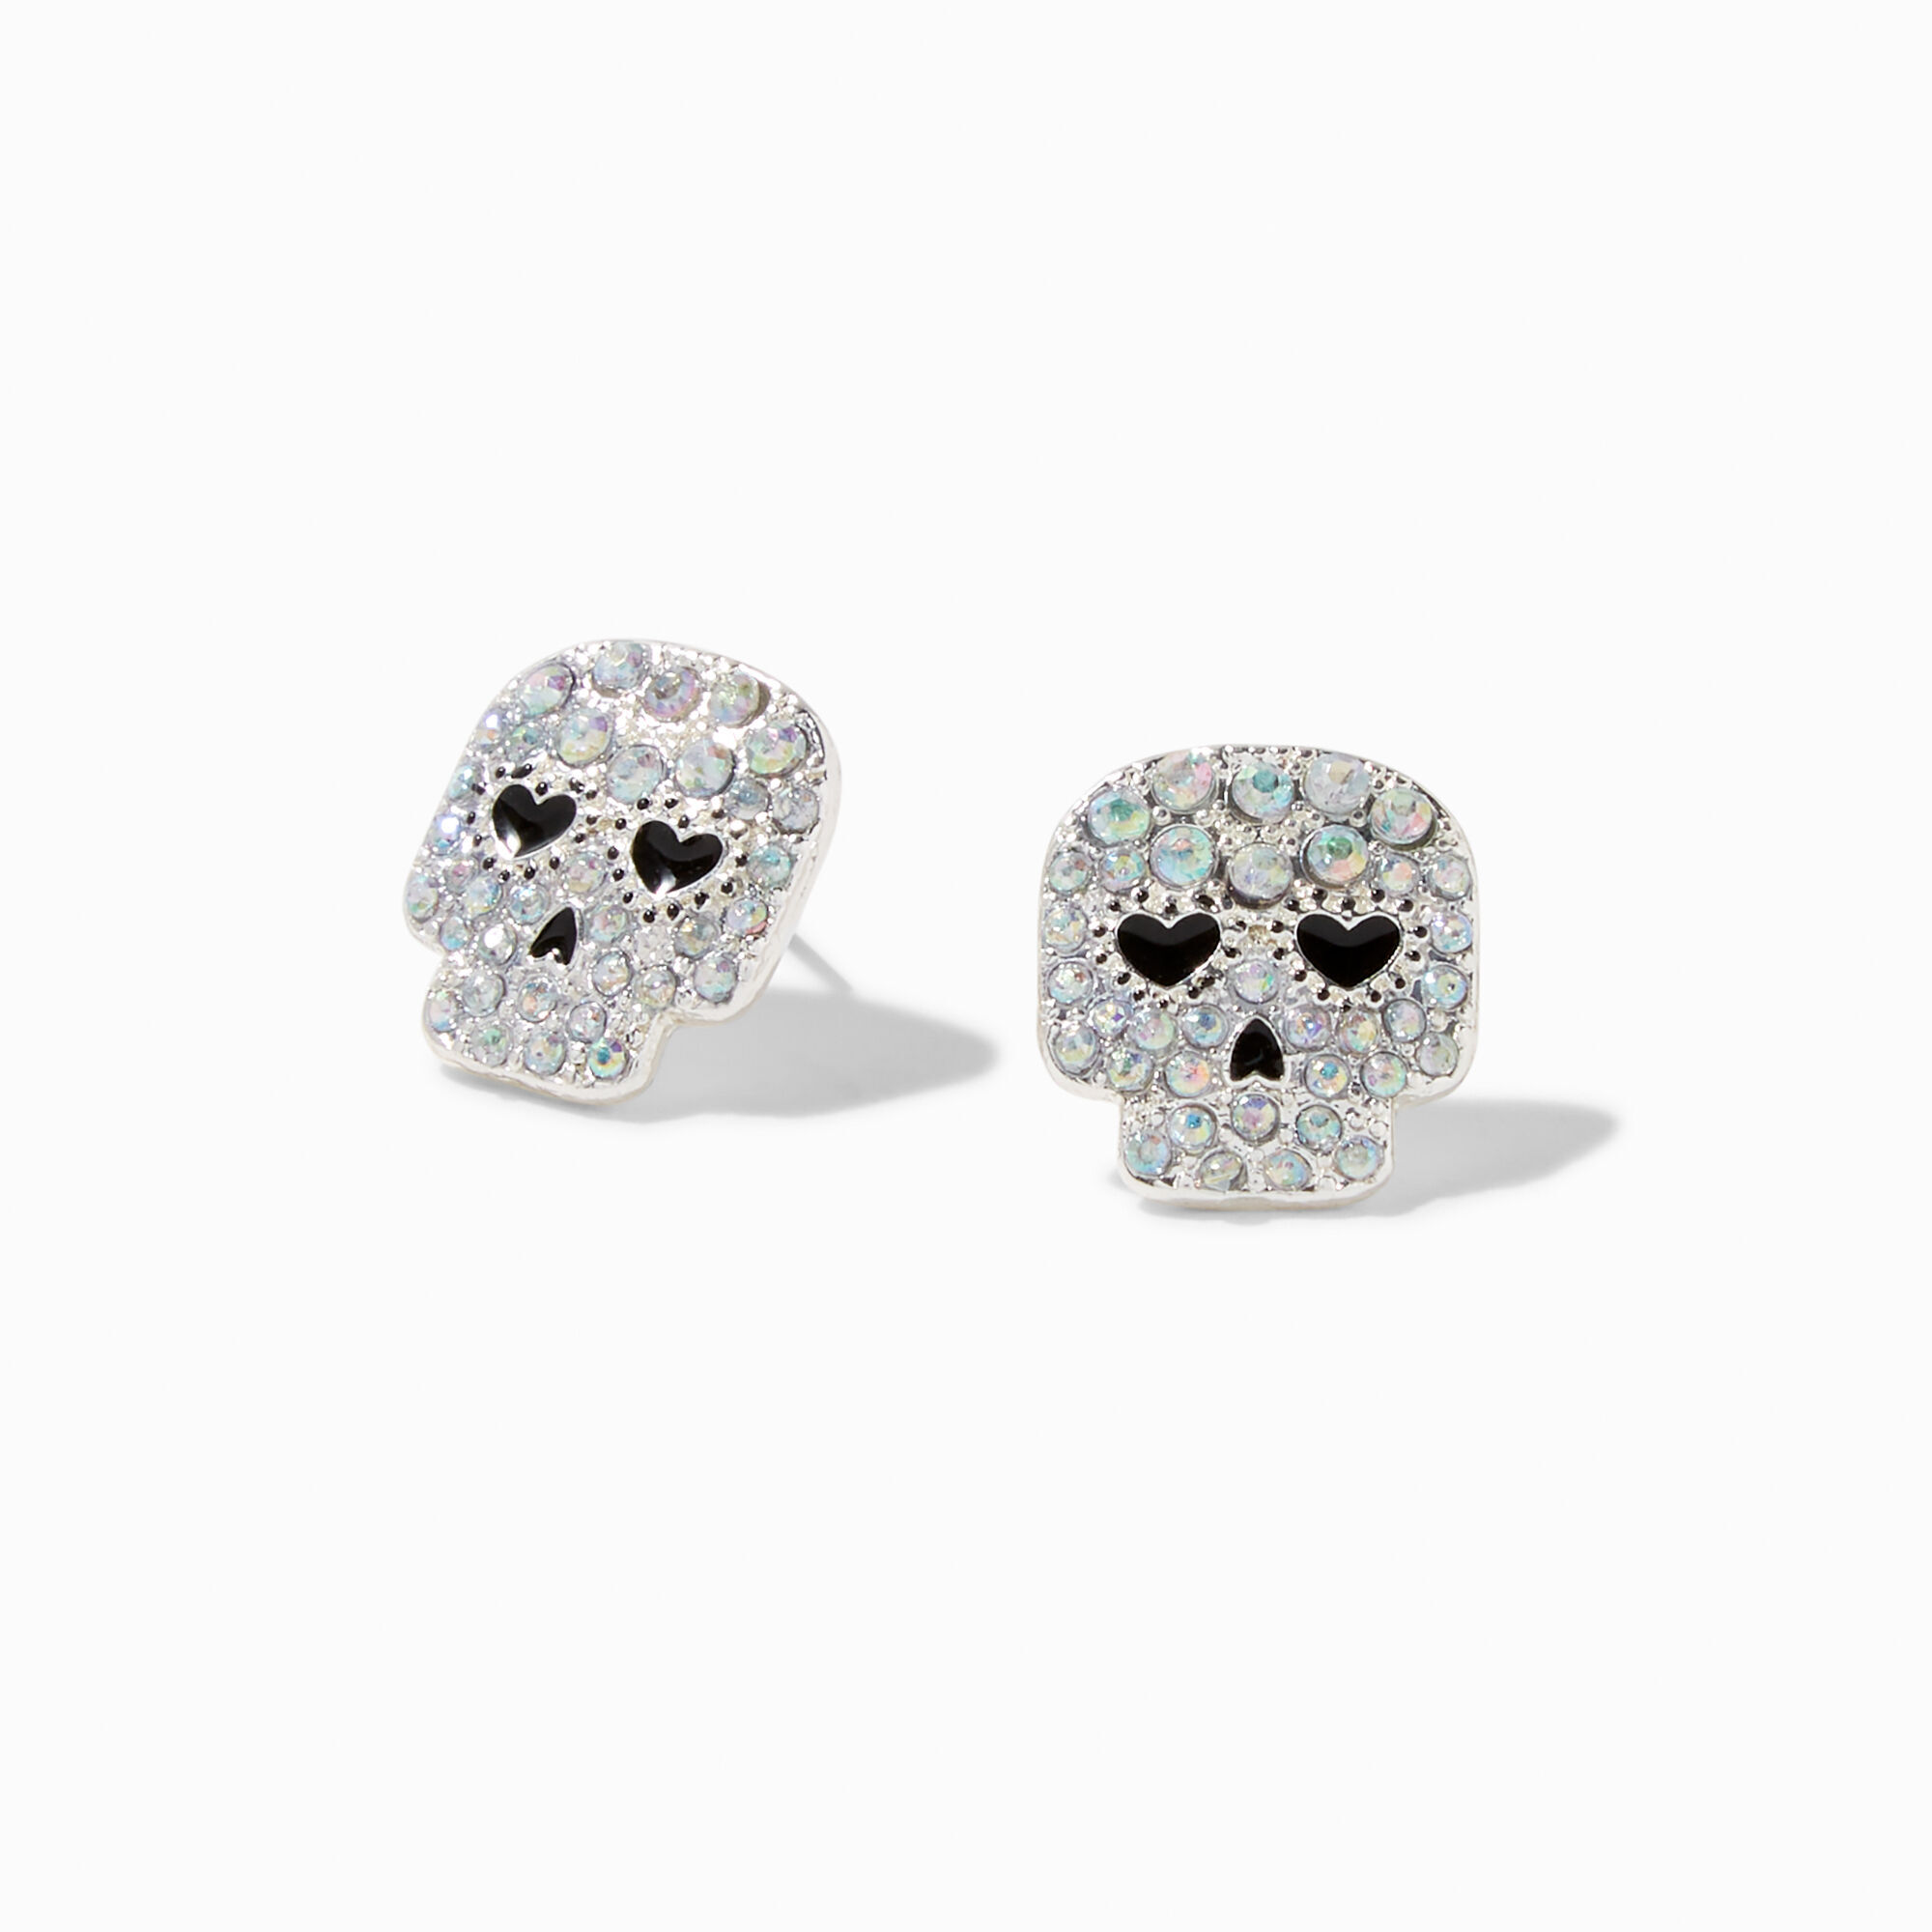 View Claires Crystal Skull Stud Earrings information